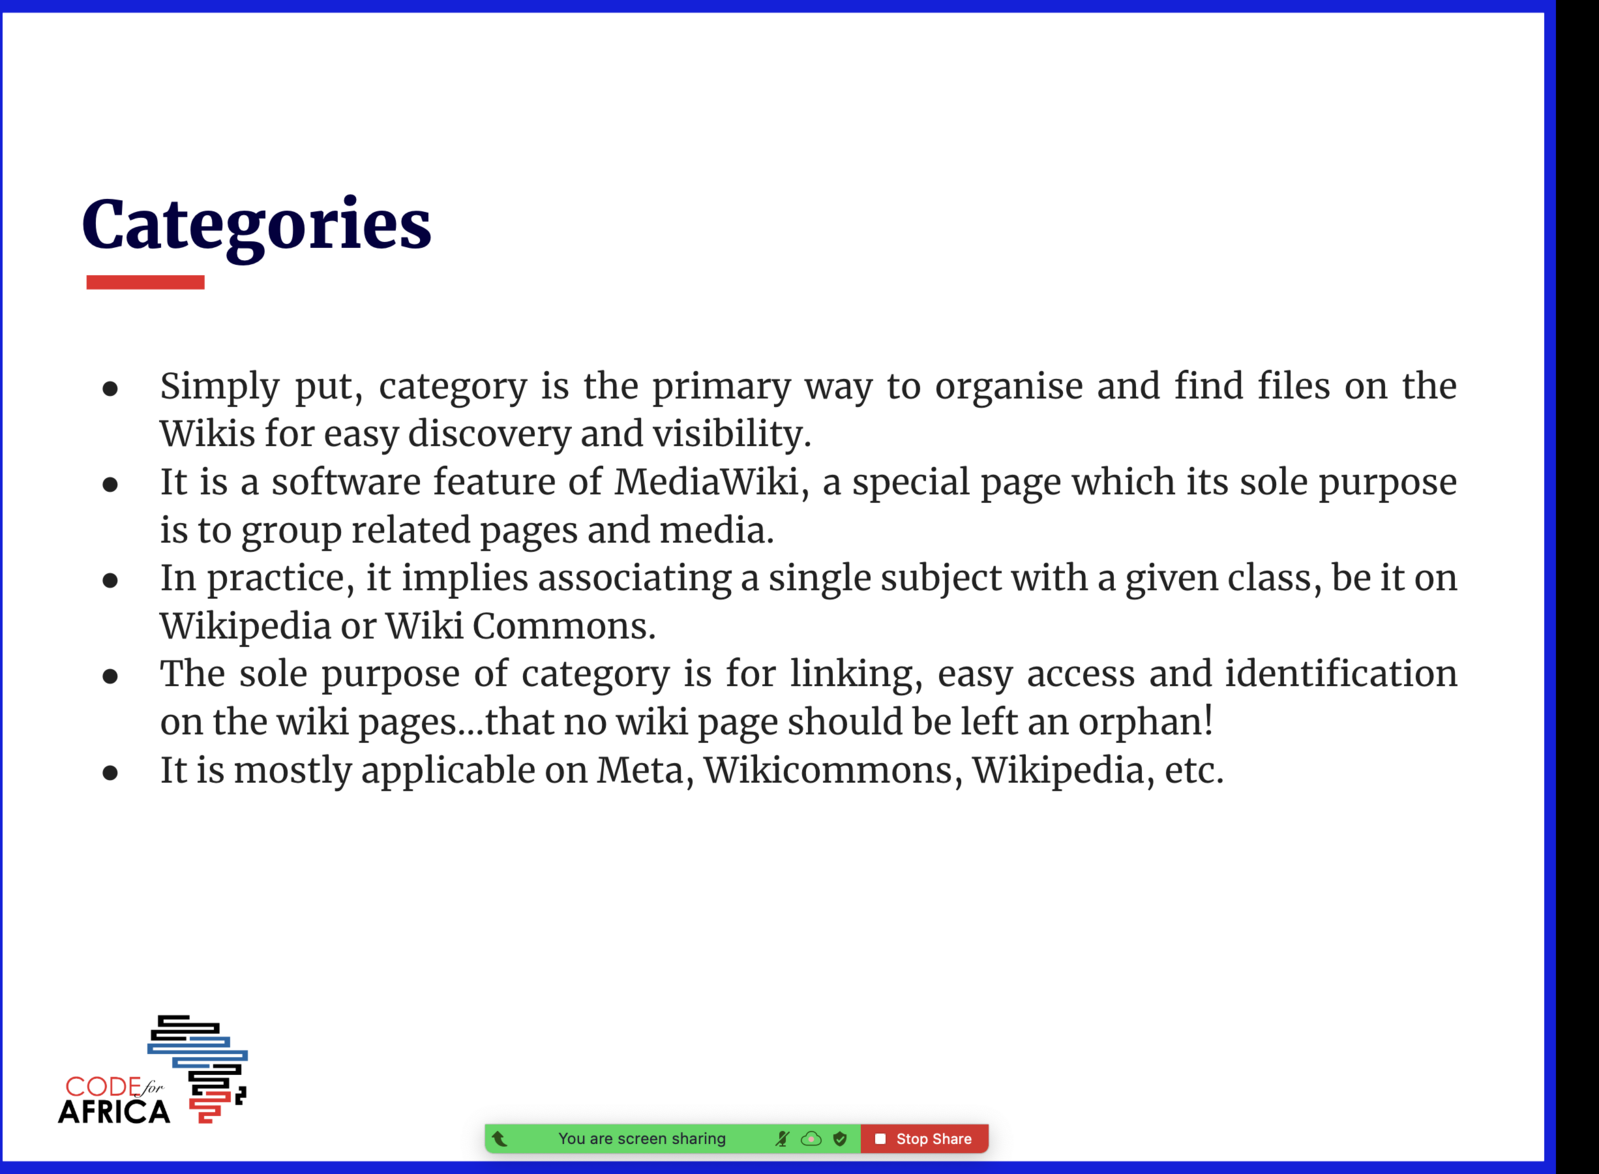 Definition of Categories